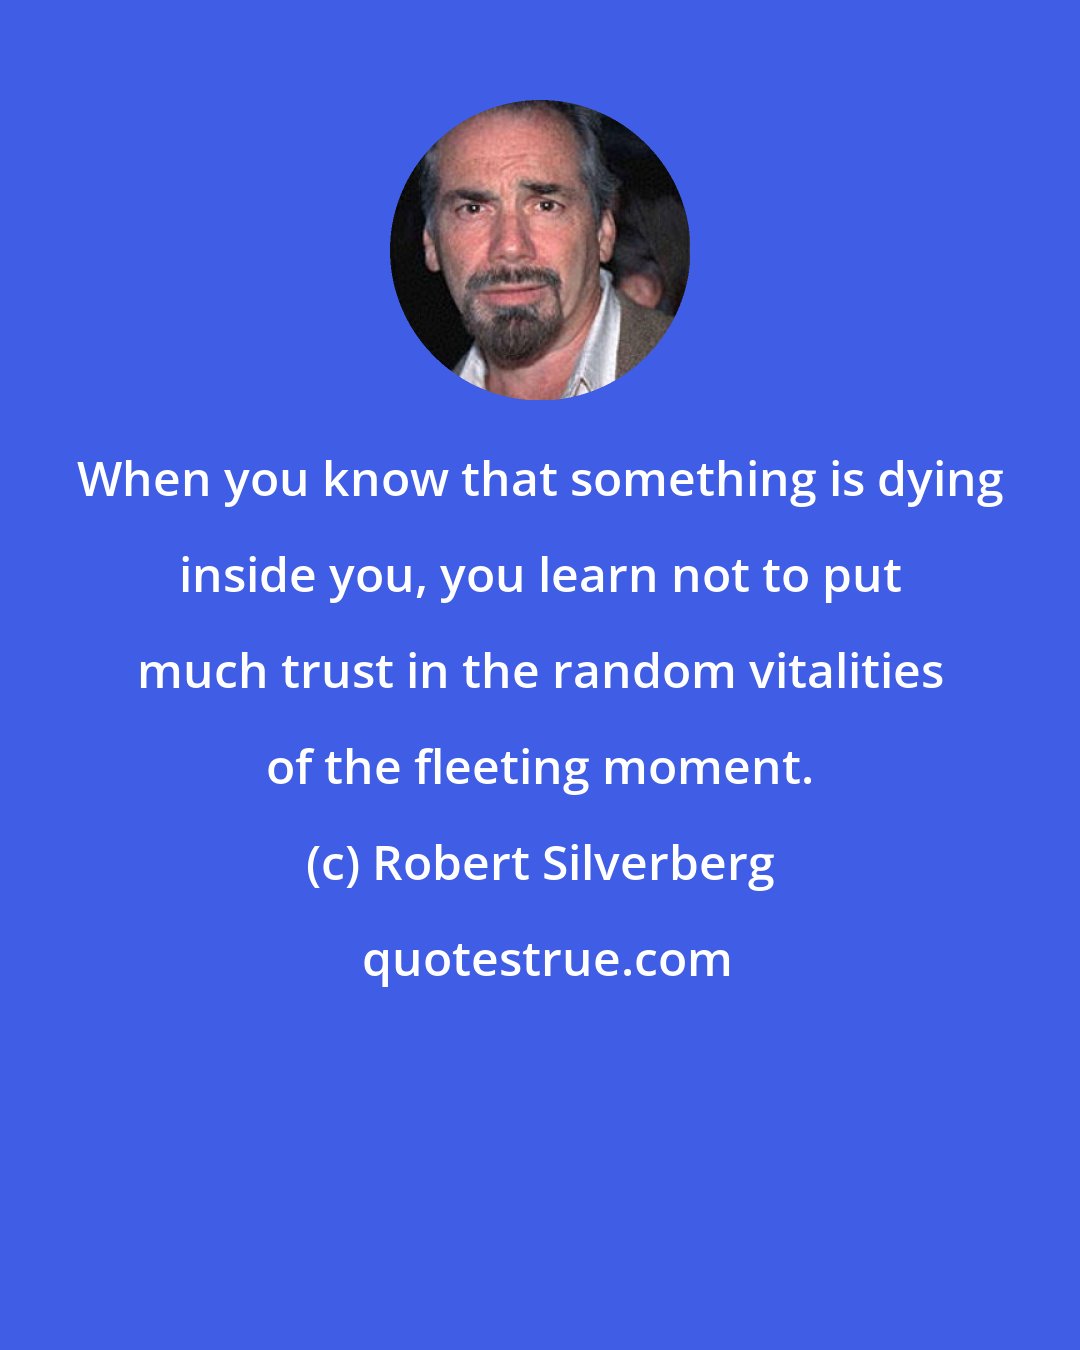 Robert Silverberg: When you know that something is dying inside you, you learn not to put much trust in the random vitalities of the fleeting moment.